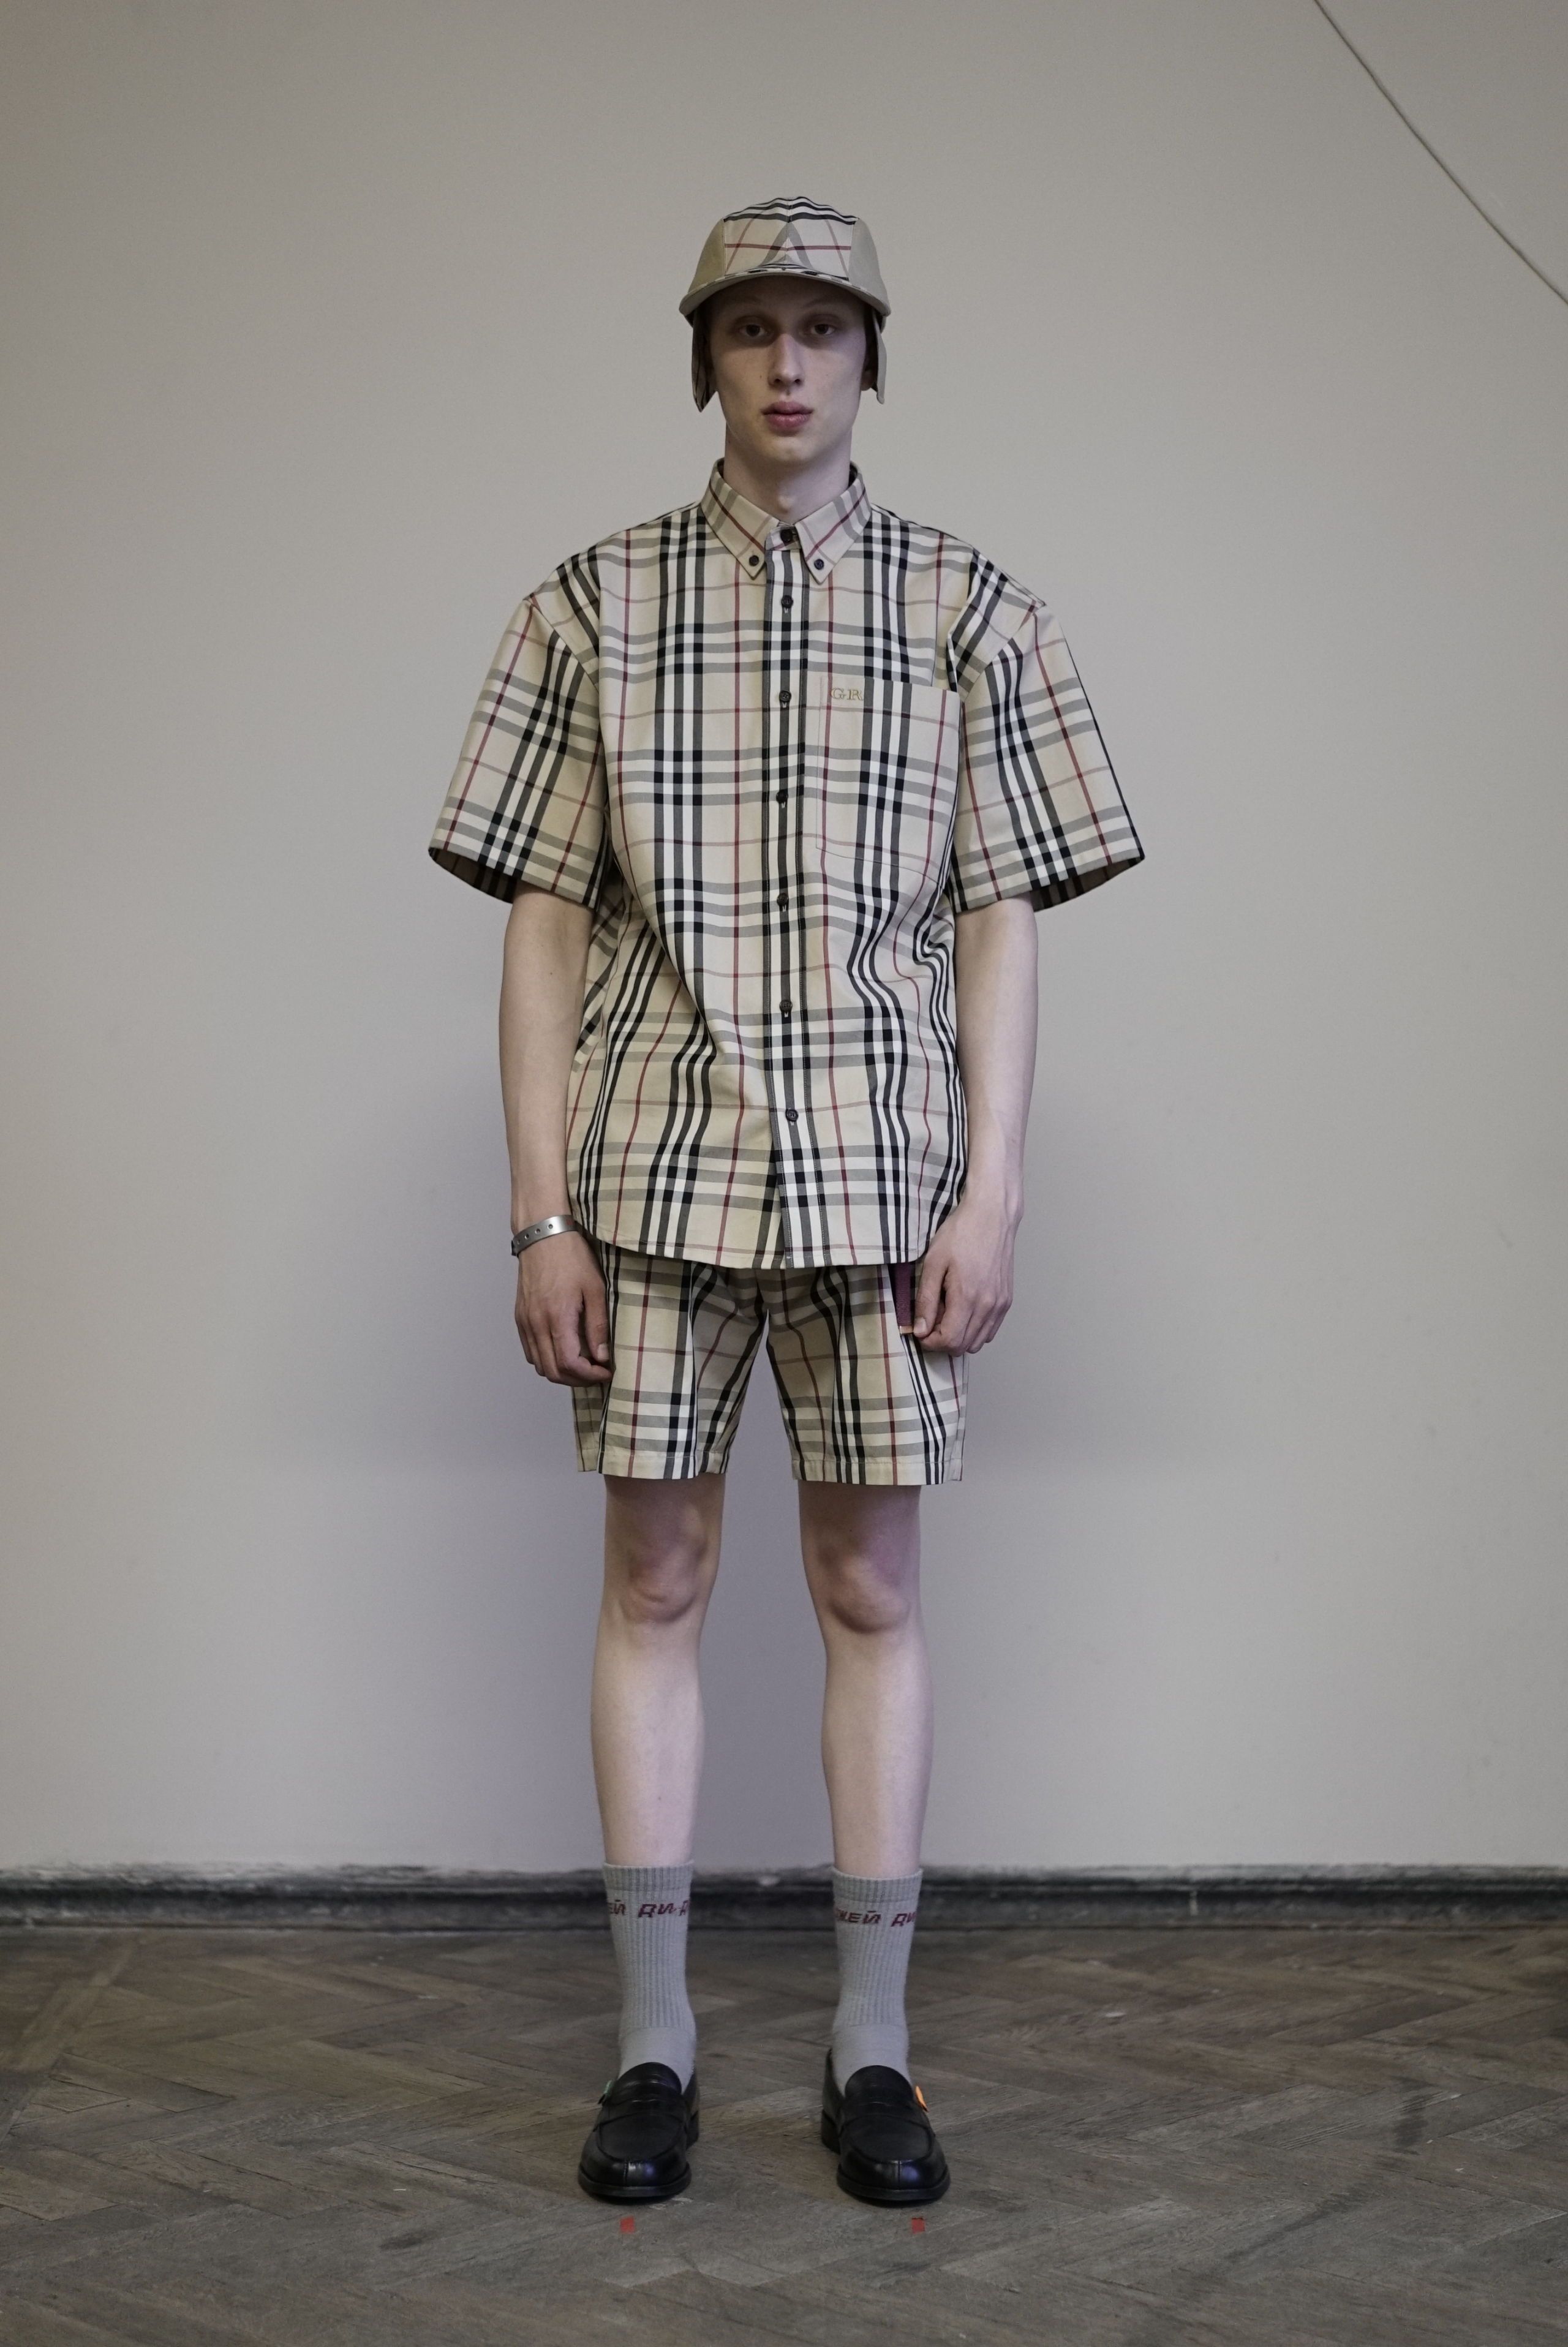 Here's Every Look From The Gosha Rubchinskiy x Burberry Collab